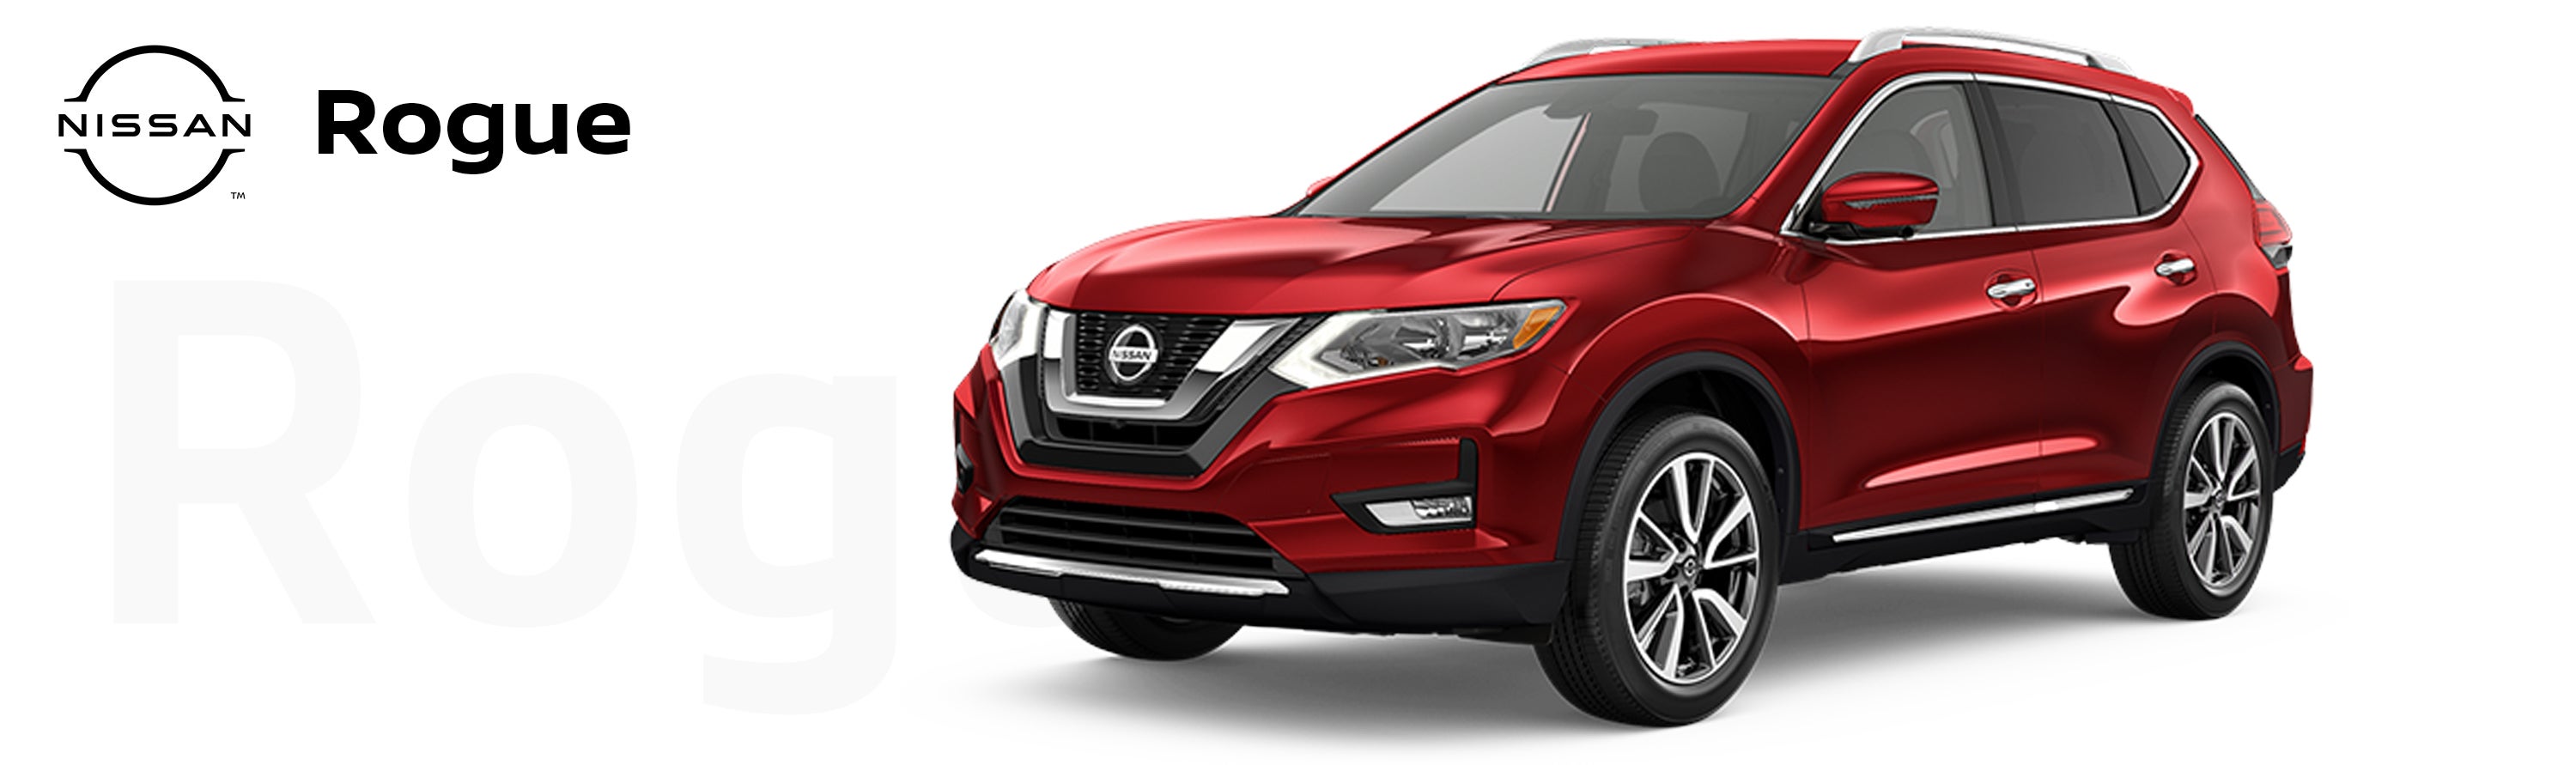 2020 Nissan Rogue at Clay Cooley Nissan of Irving in Irving TX